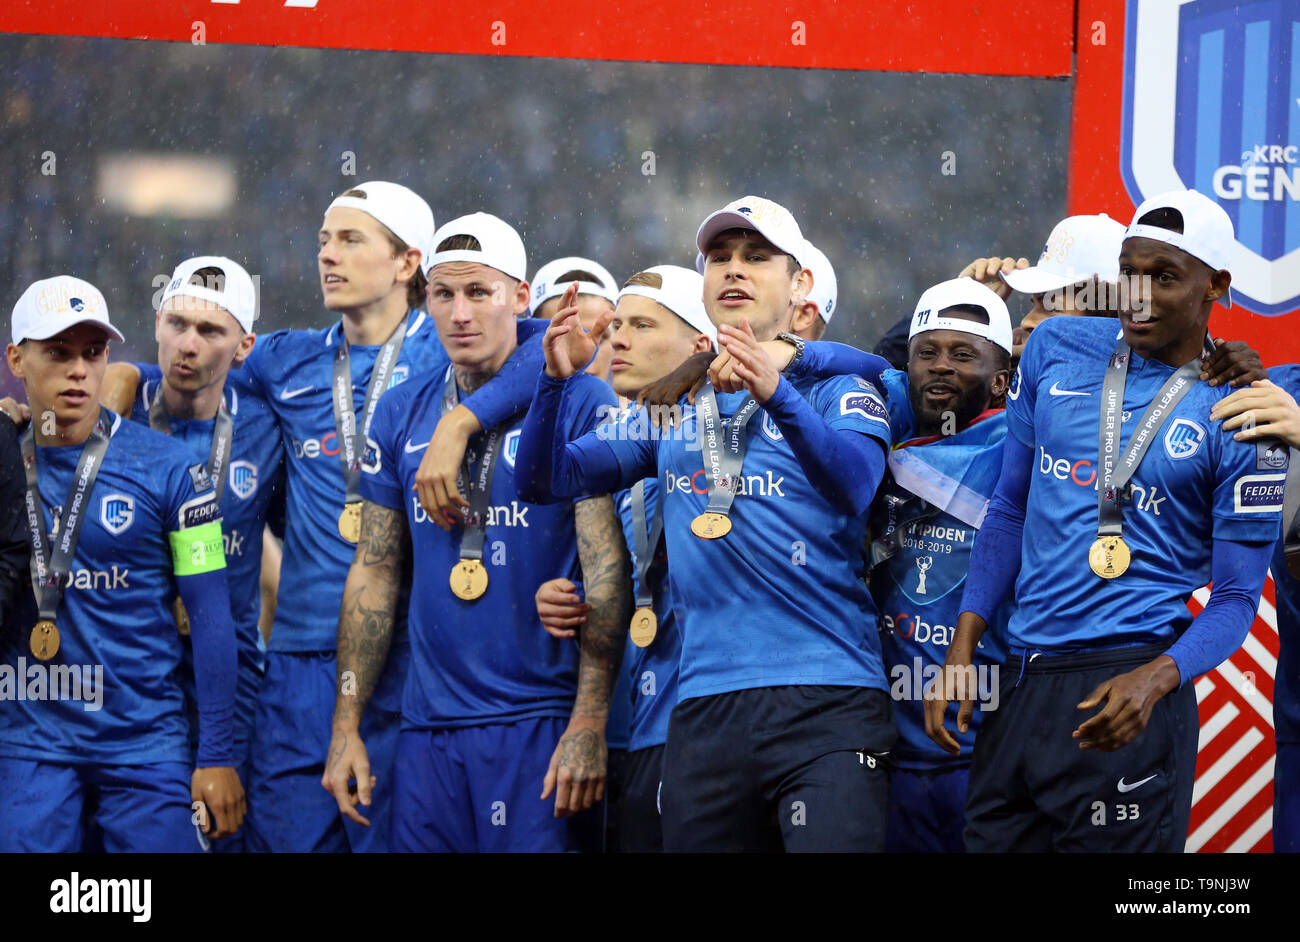 GENK, BELGIUM - MAY 19: Genk's players celebrate the title of champion of  Belgium after the Jupiler Pro League play-off 1 match (day 10) between Krc  Genk and Standard de Liege on